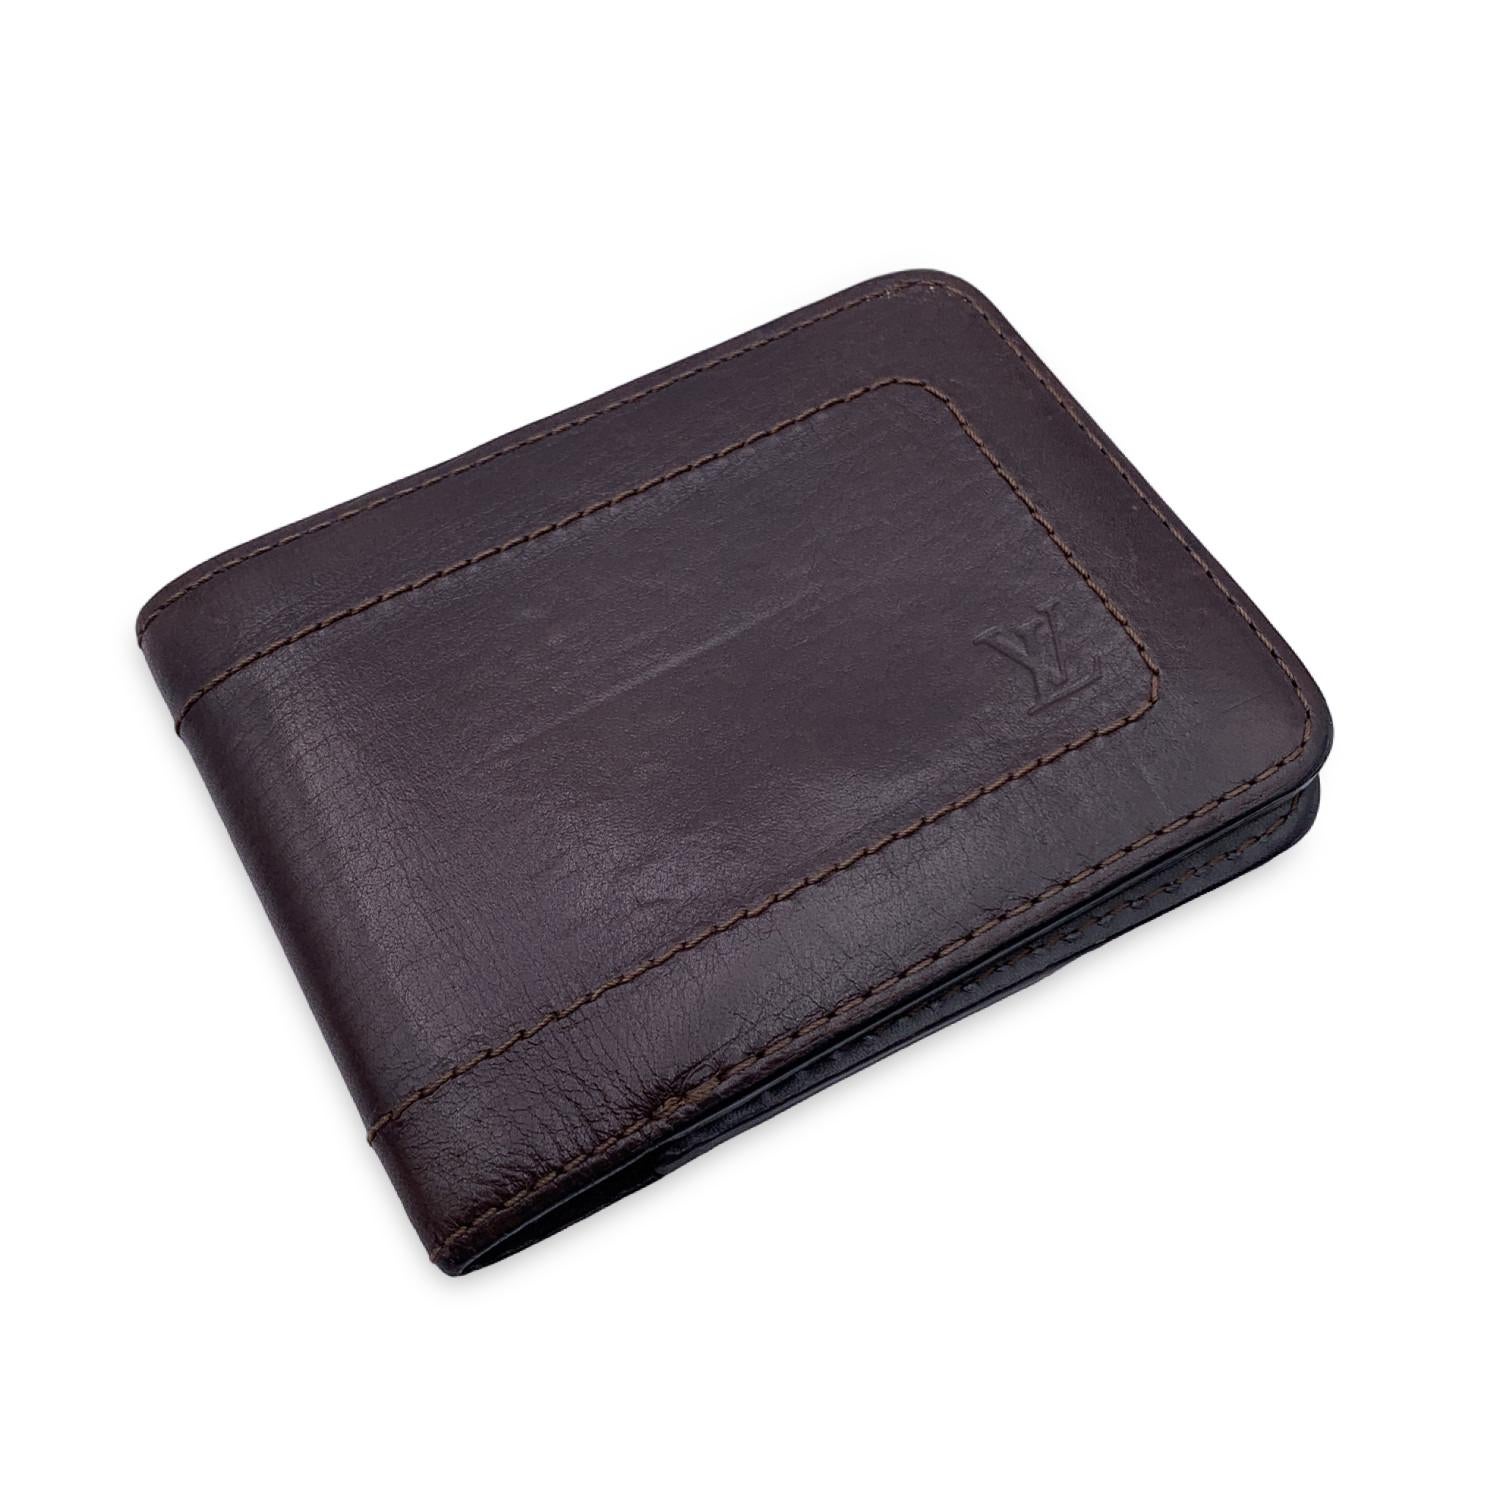 Louis Vuitton brown leather Utah Credit Card Holder. Bifold design. 2 bill compartments, 6 credit card slots, 1 plasic window and 2 open pockets inside. Leather lining. 'LOUIS VUITTON Paris - made in Spain' embossed inside. Serial number embossed